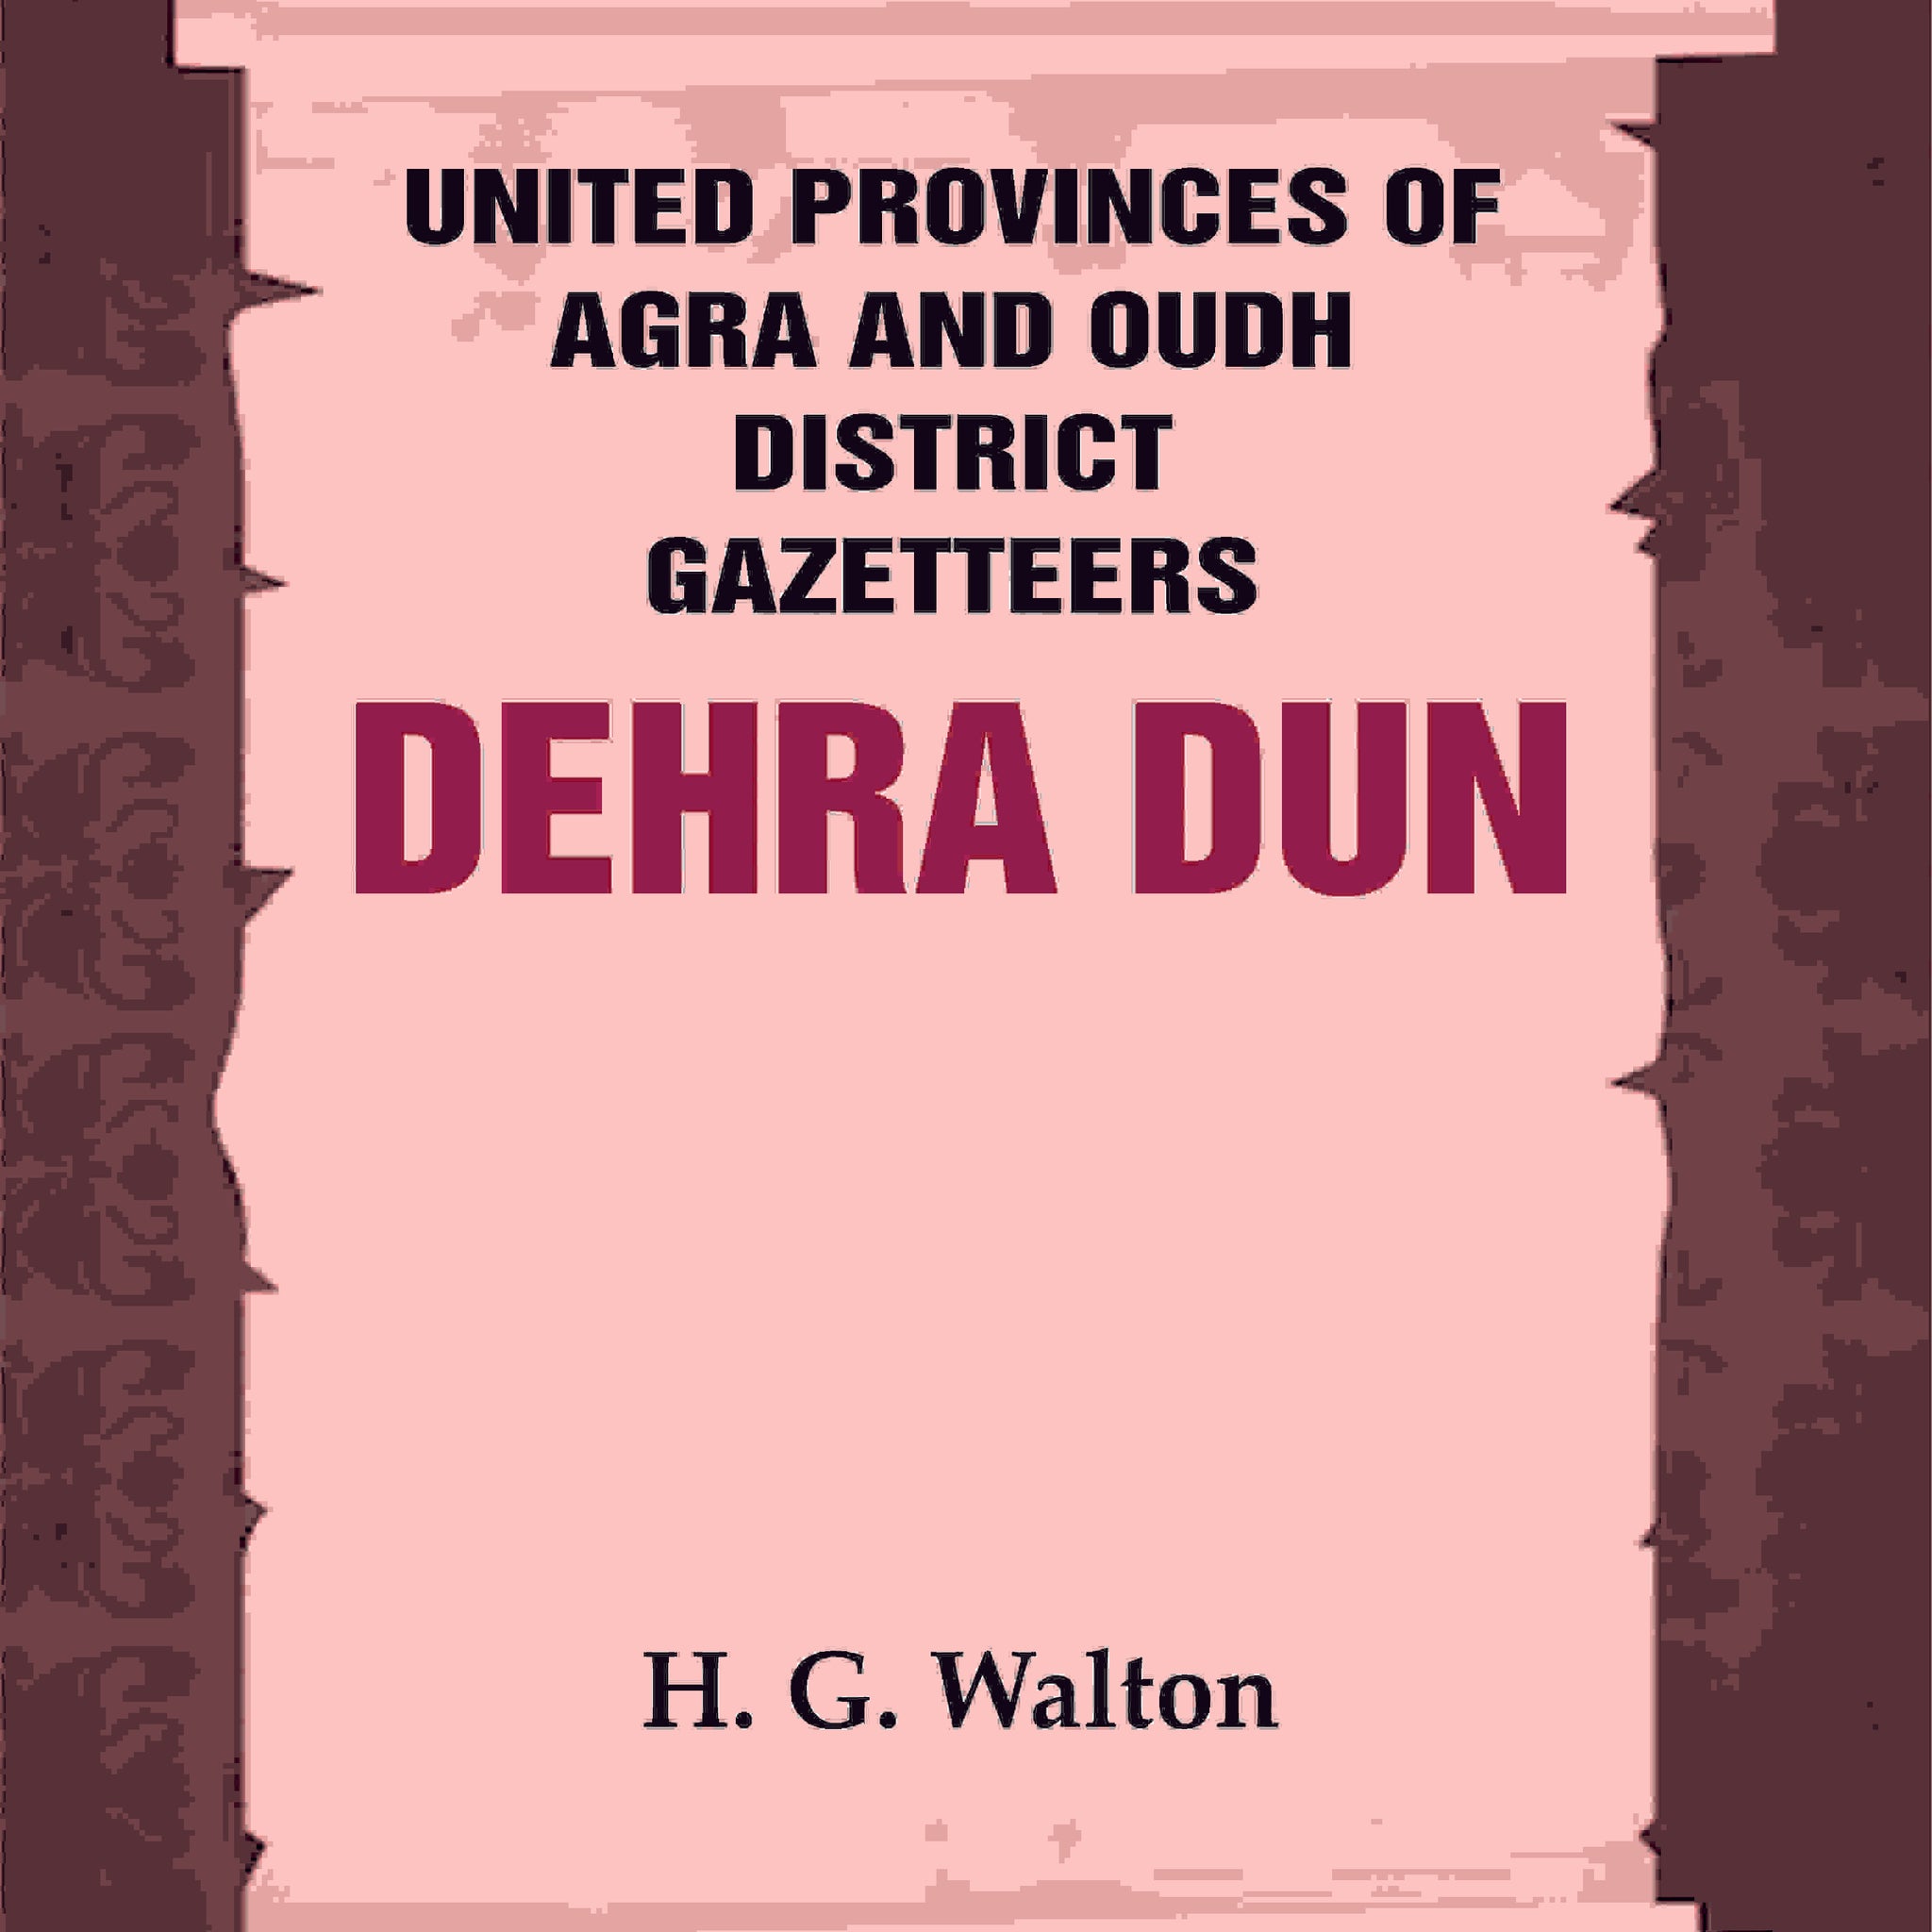 United Provinces of Agra and Oudh District Gazetteers: Dehra Dun